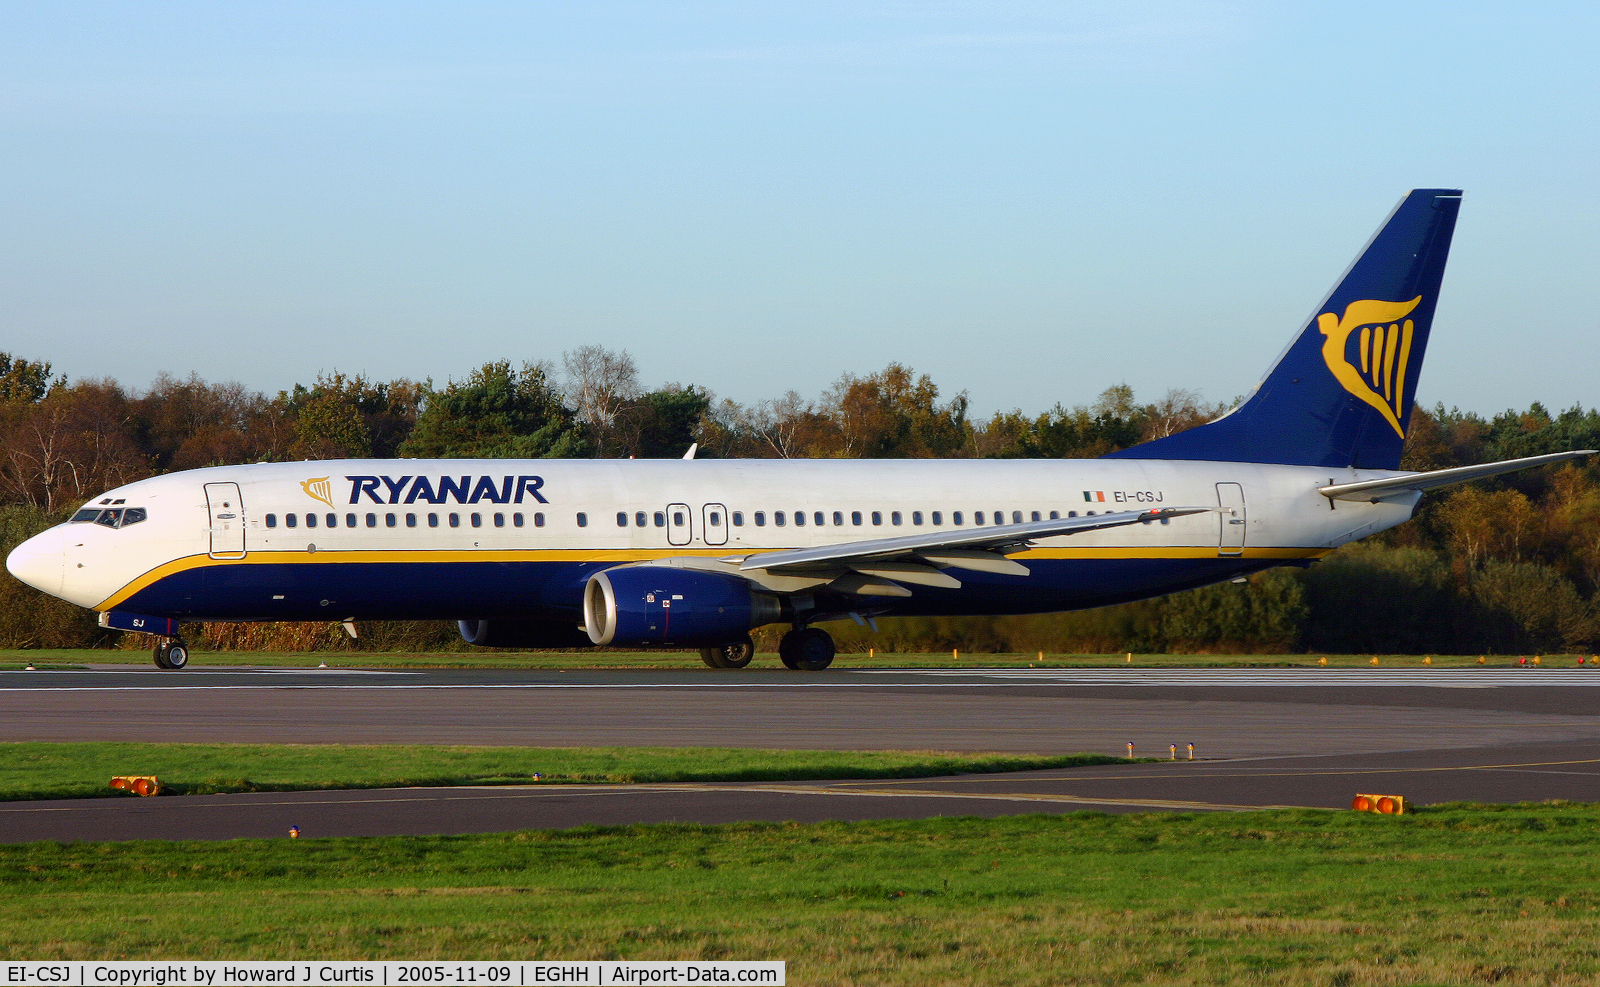 EI-CSJ, 2000 Boeing 737-8AS C/N 29925, Pre winglets and in old colours.